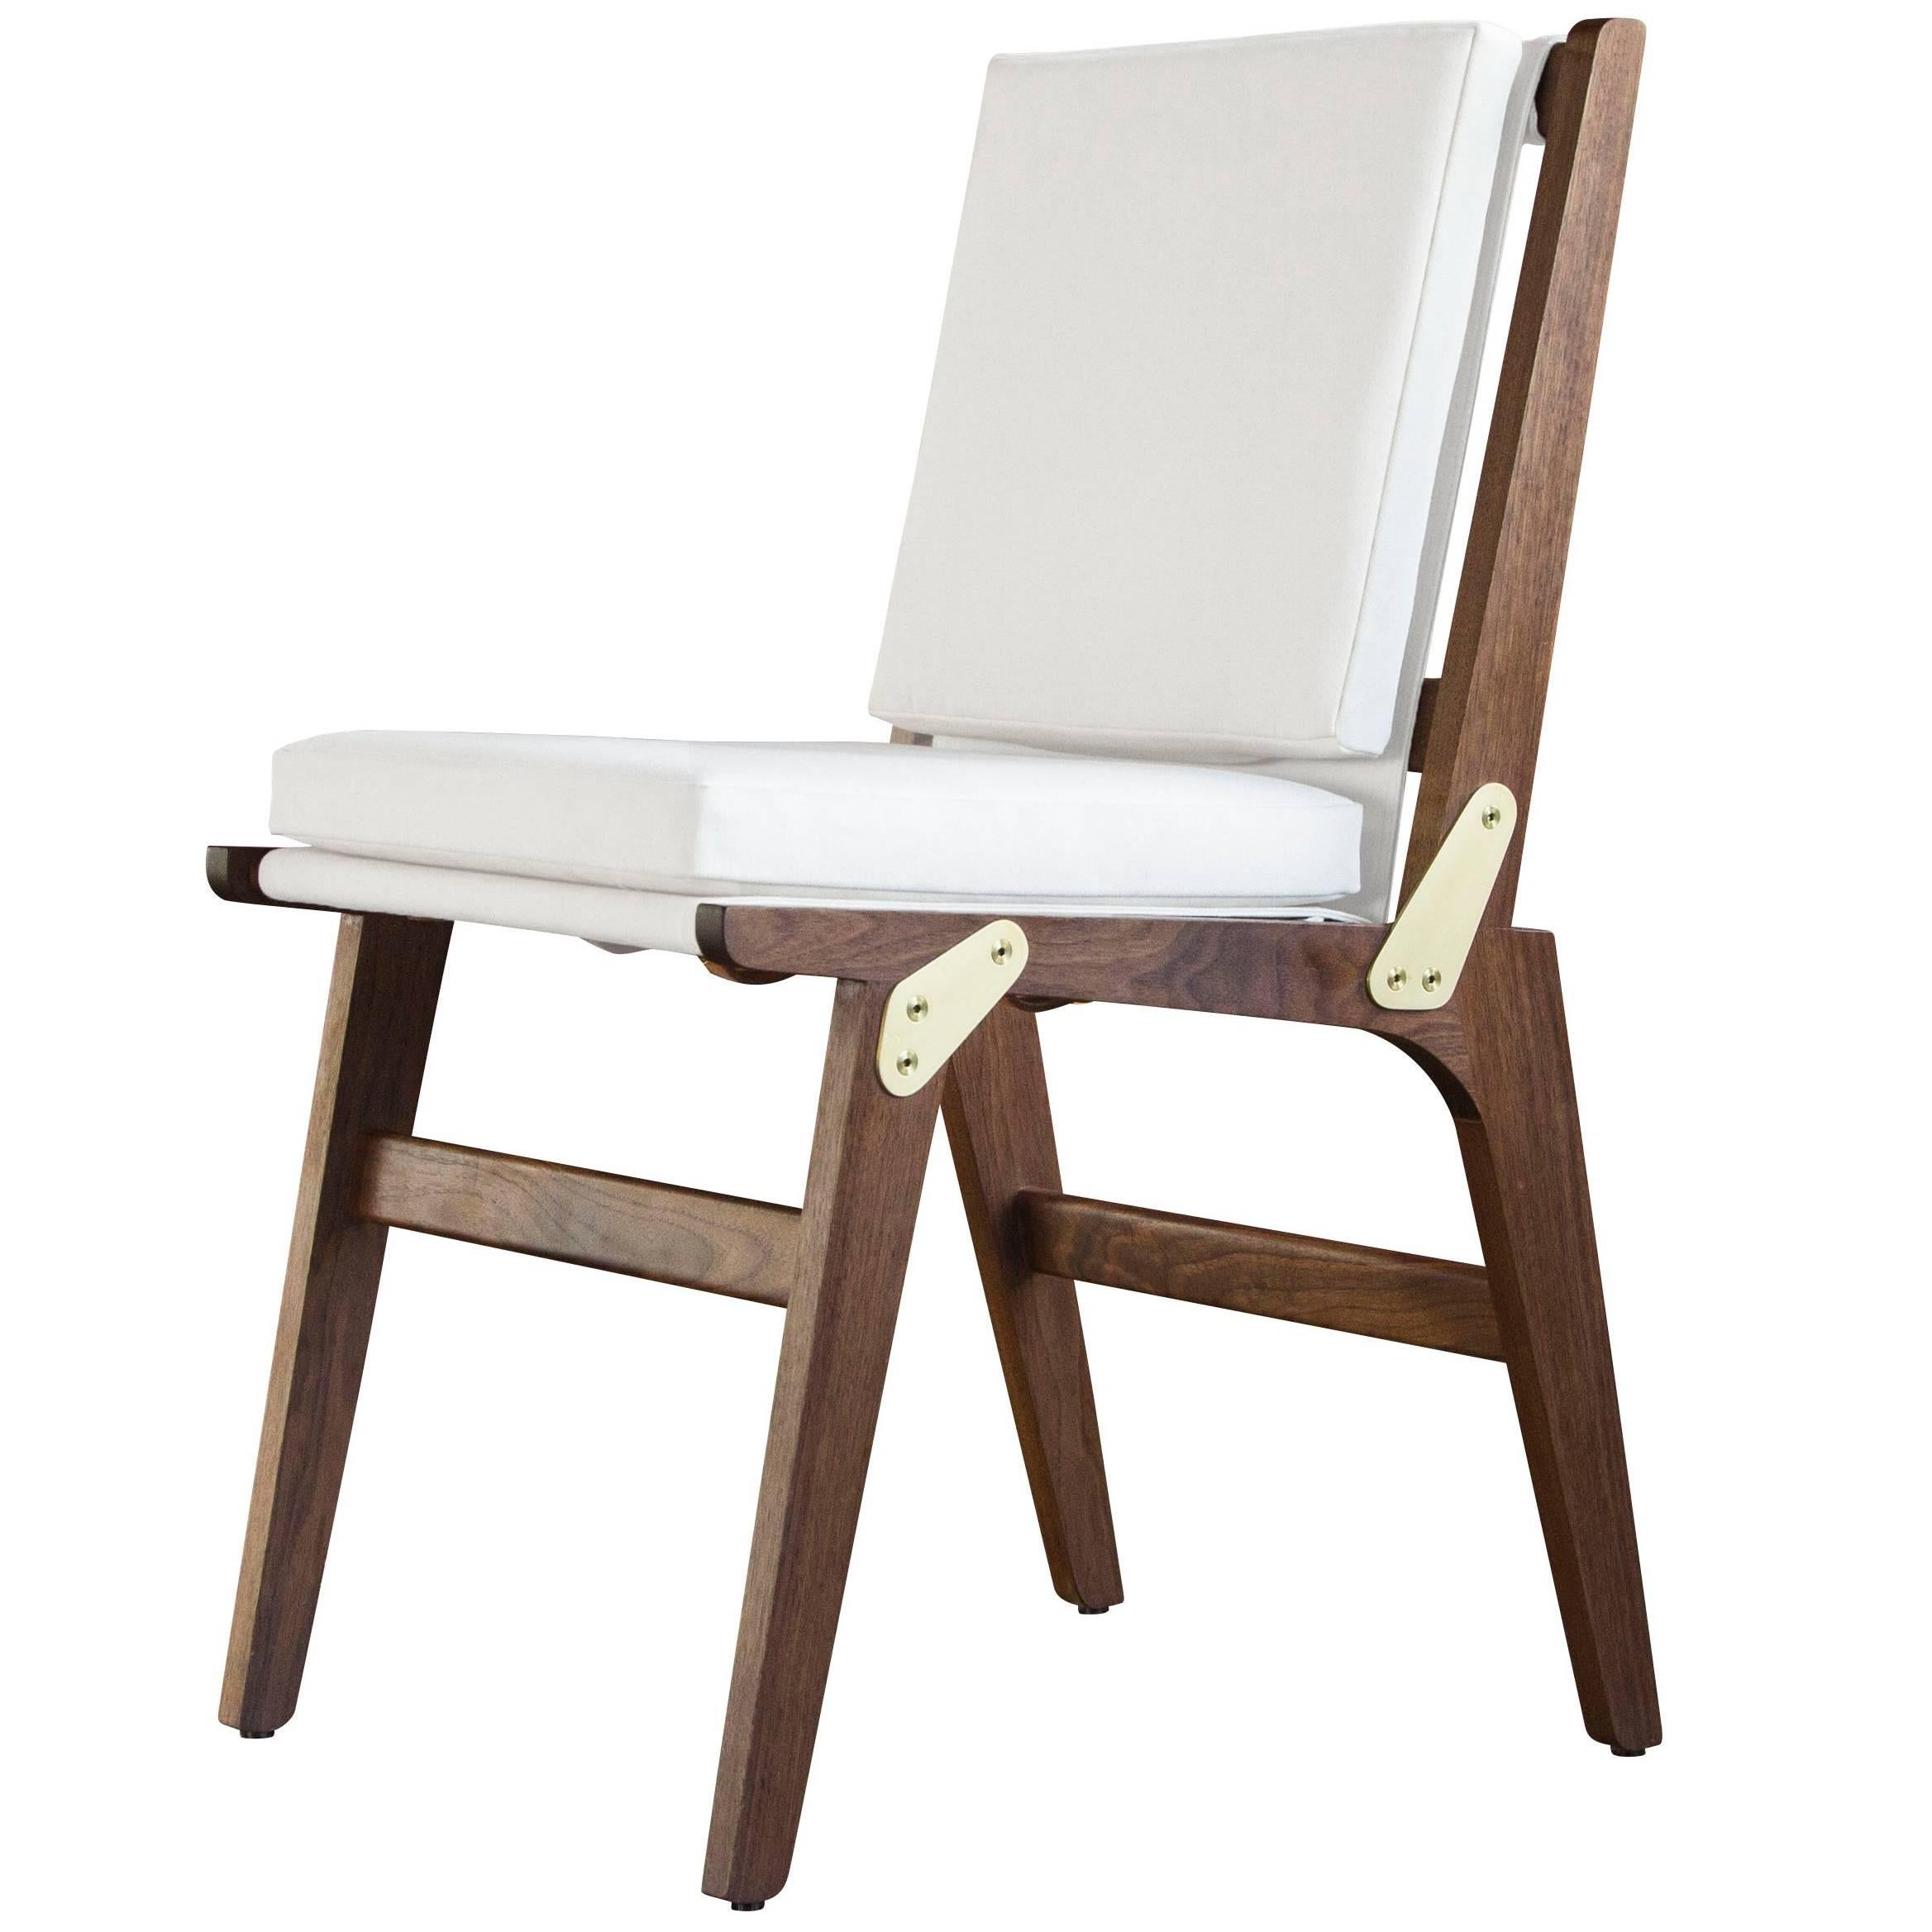 O.F.S. Dining Chair, Walnut with White Canvas - handcrafted by Richard Wrightman